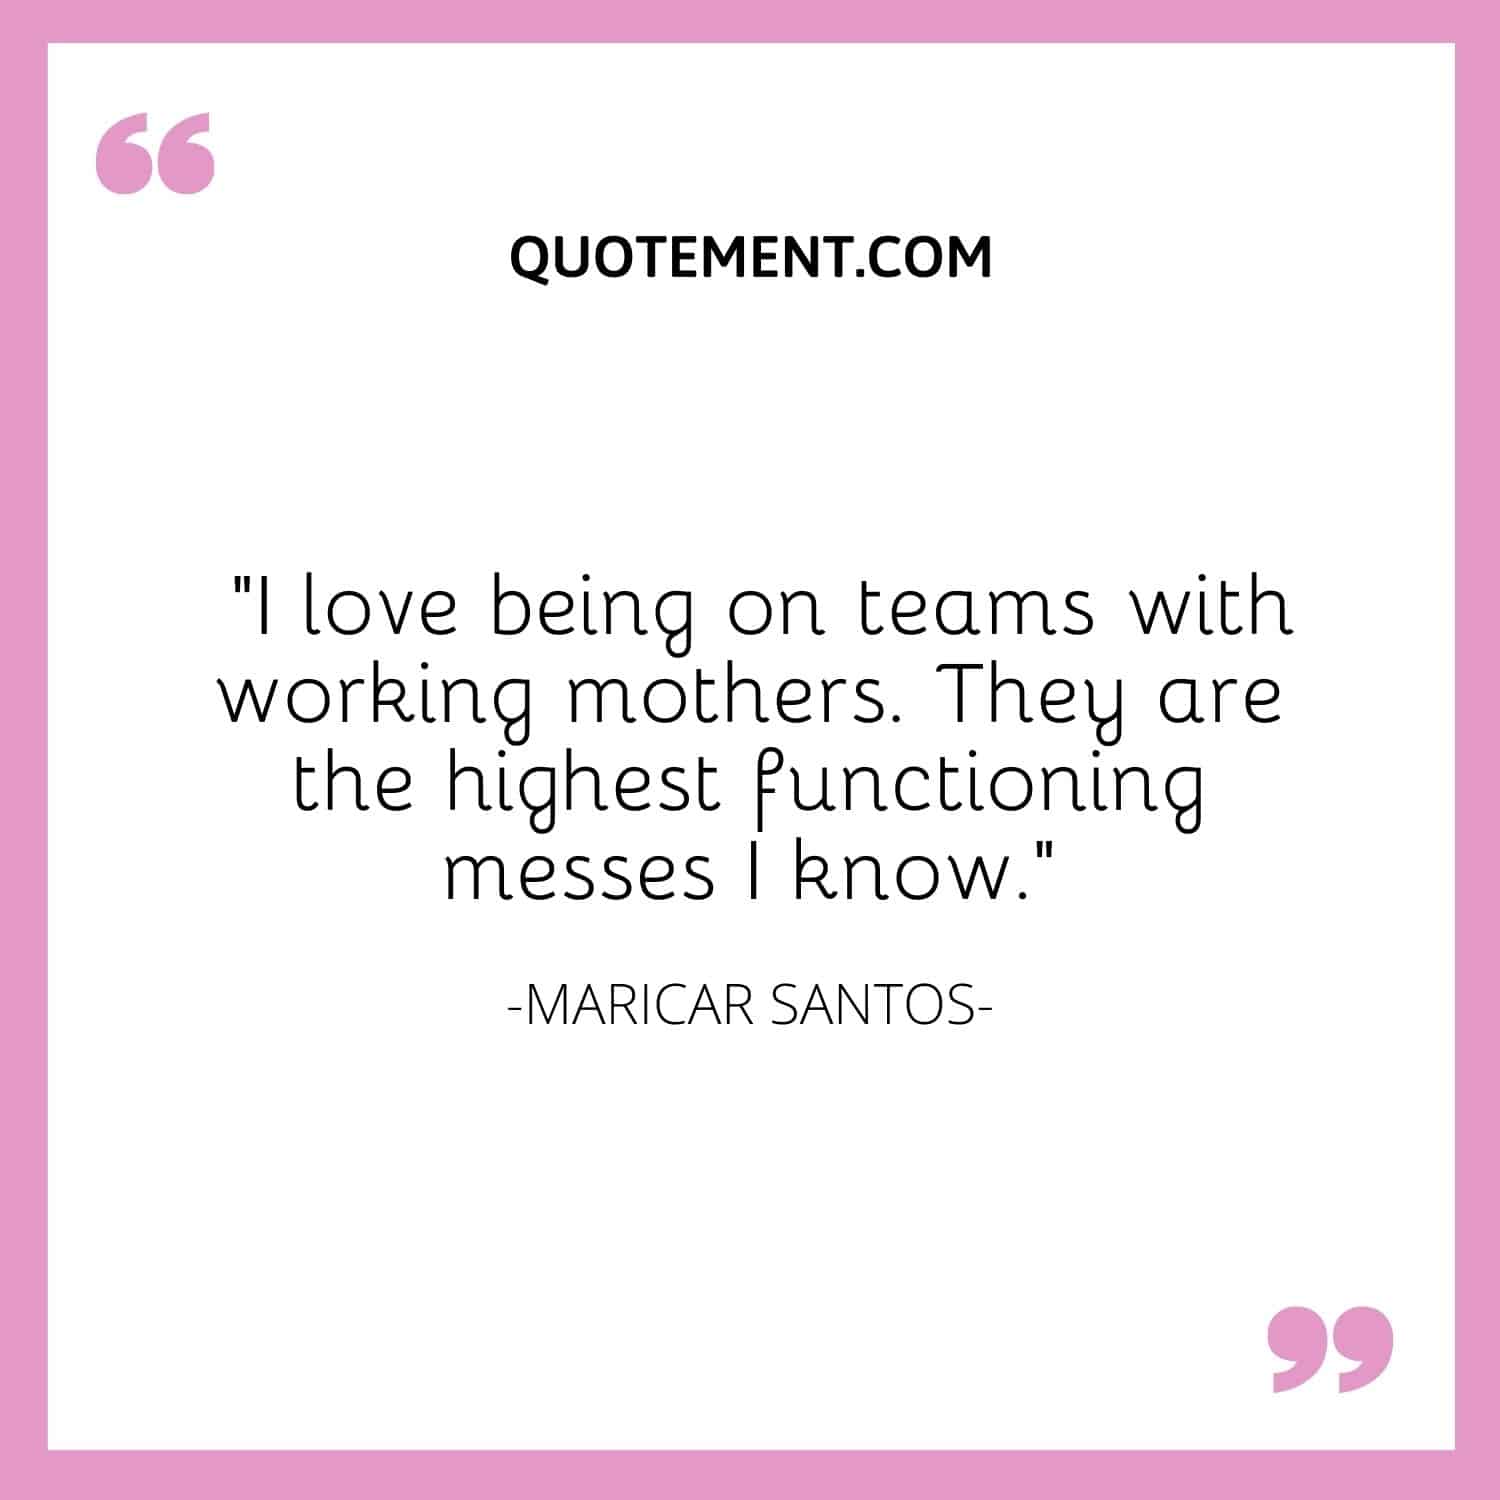 I love being on teams with working mothers